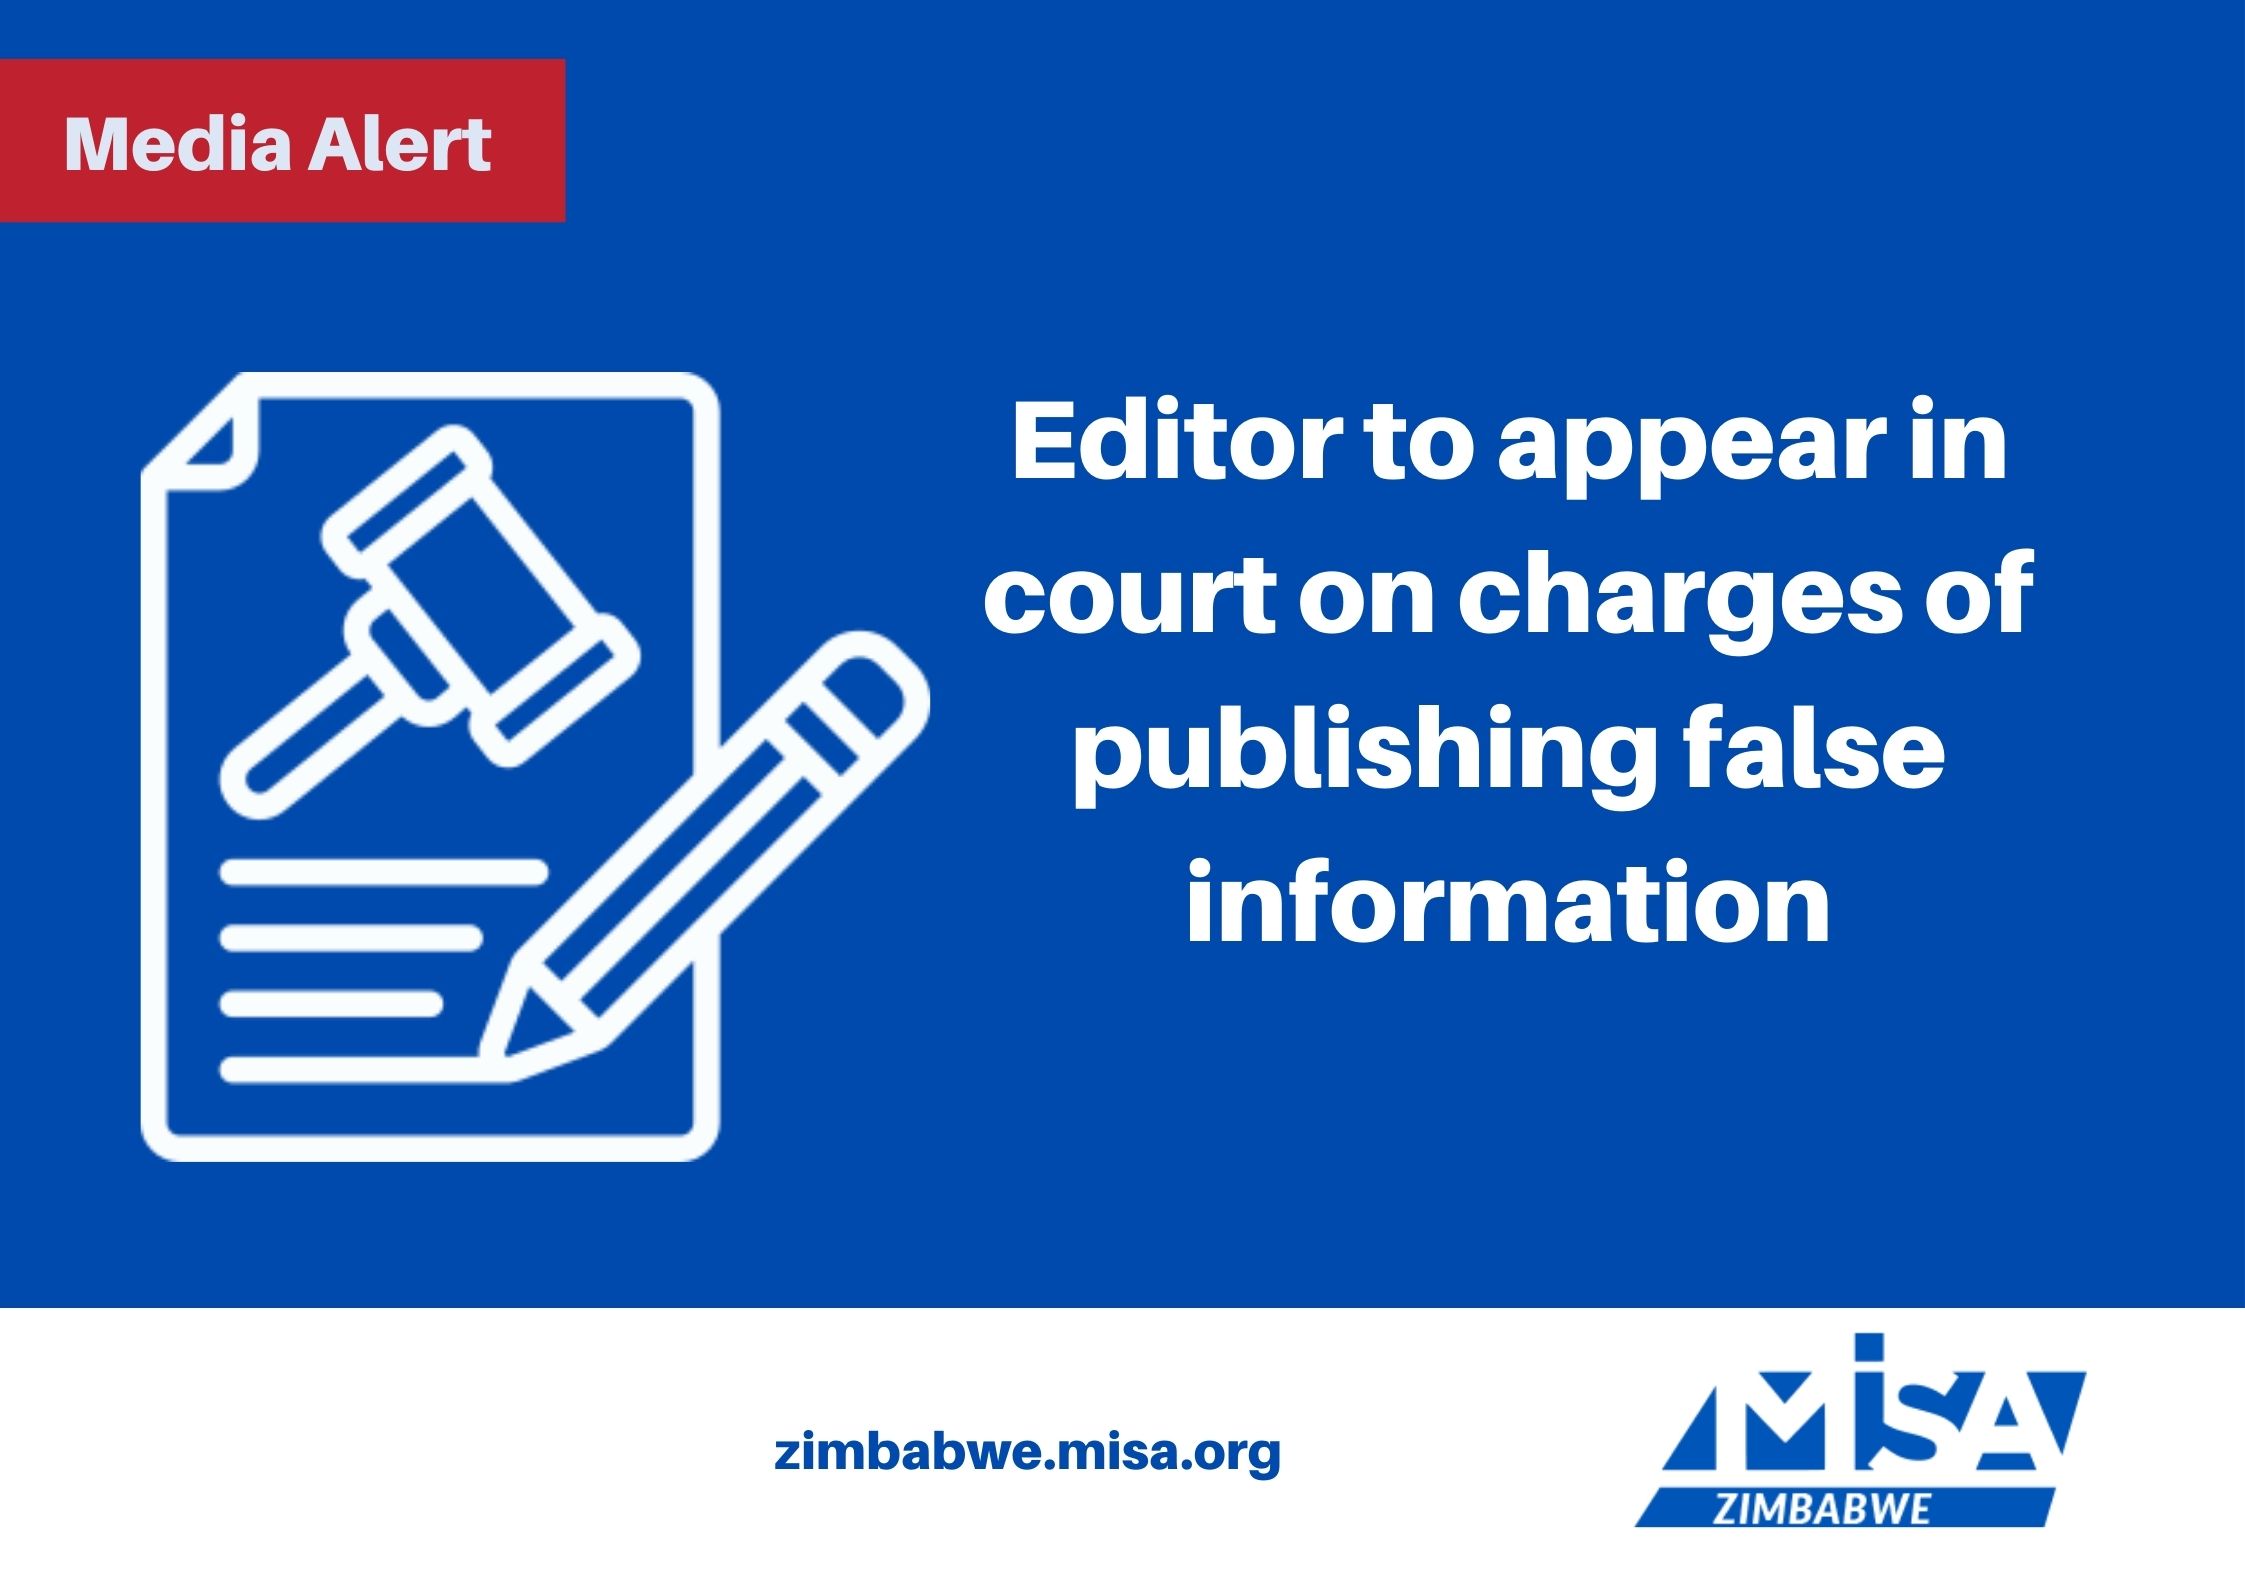 Editor to appear in court on charges of publishing false information